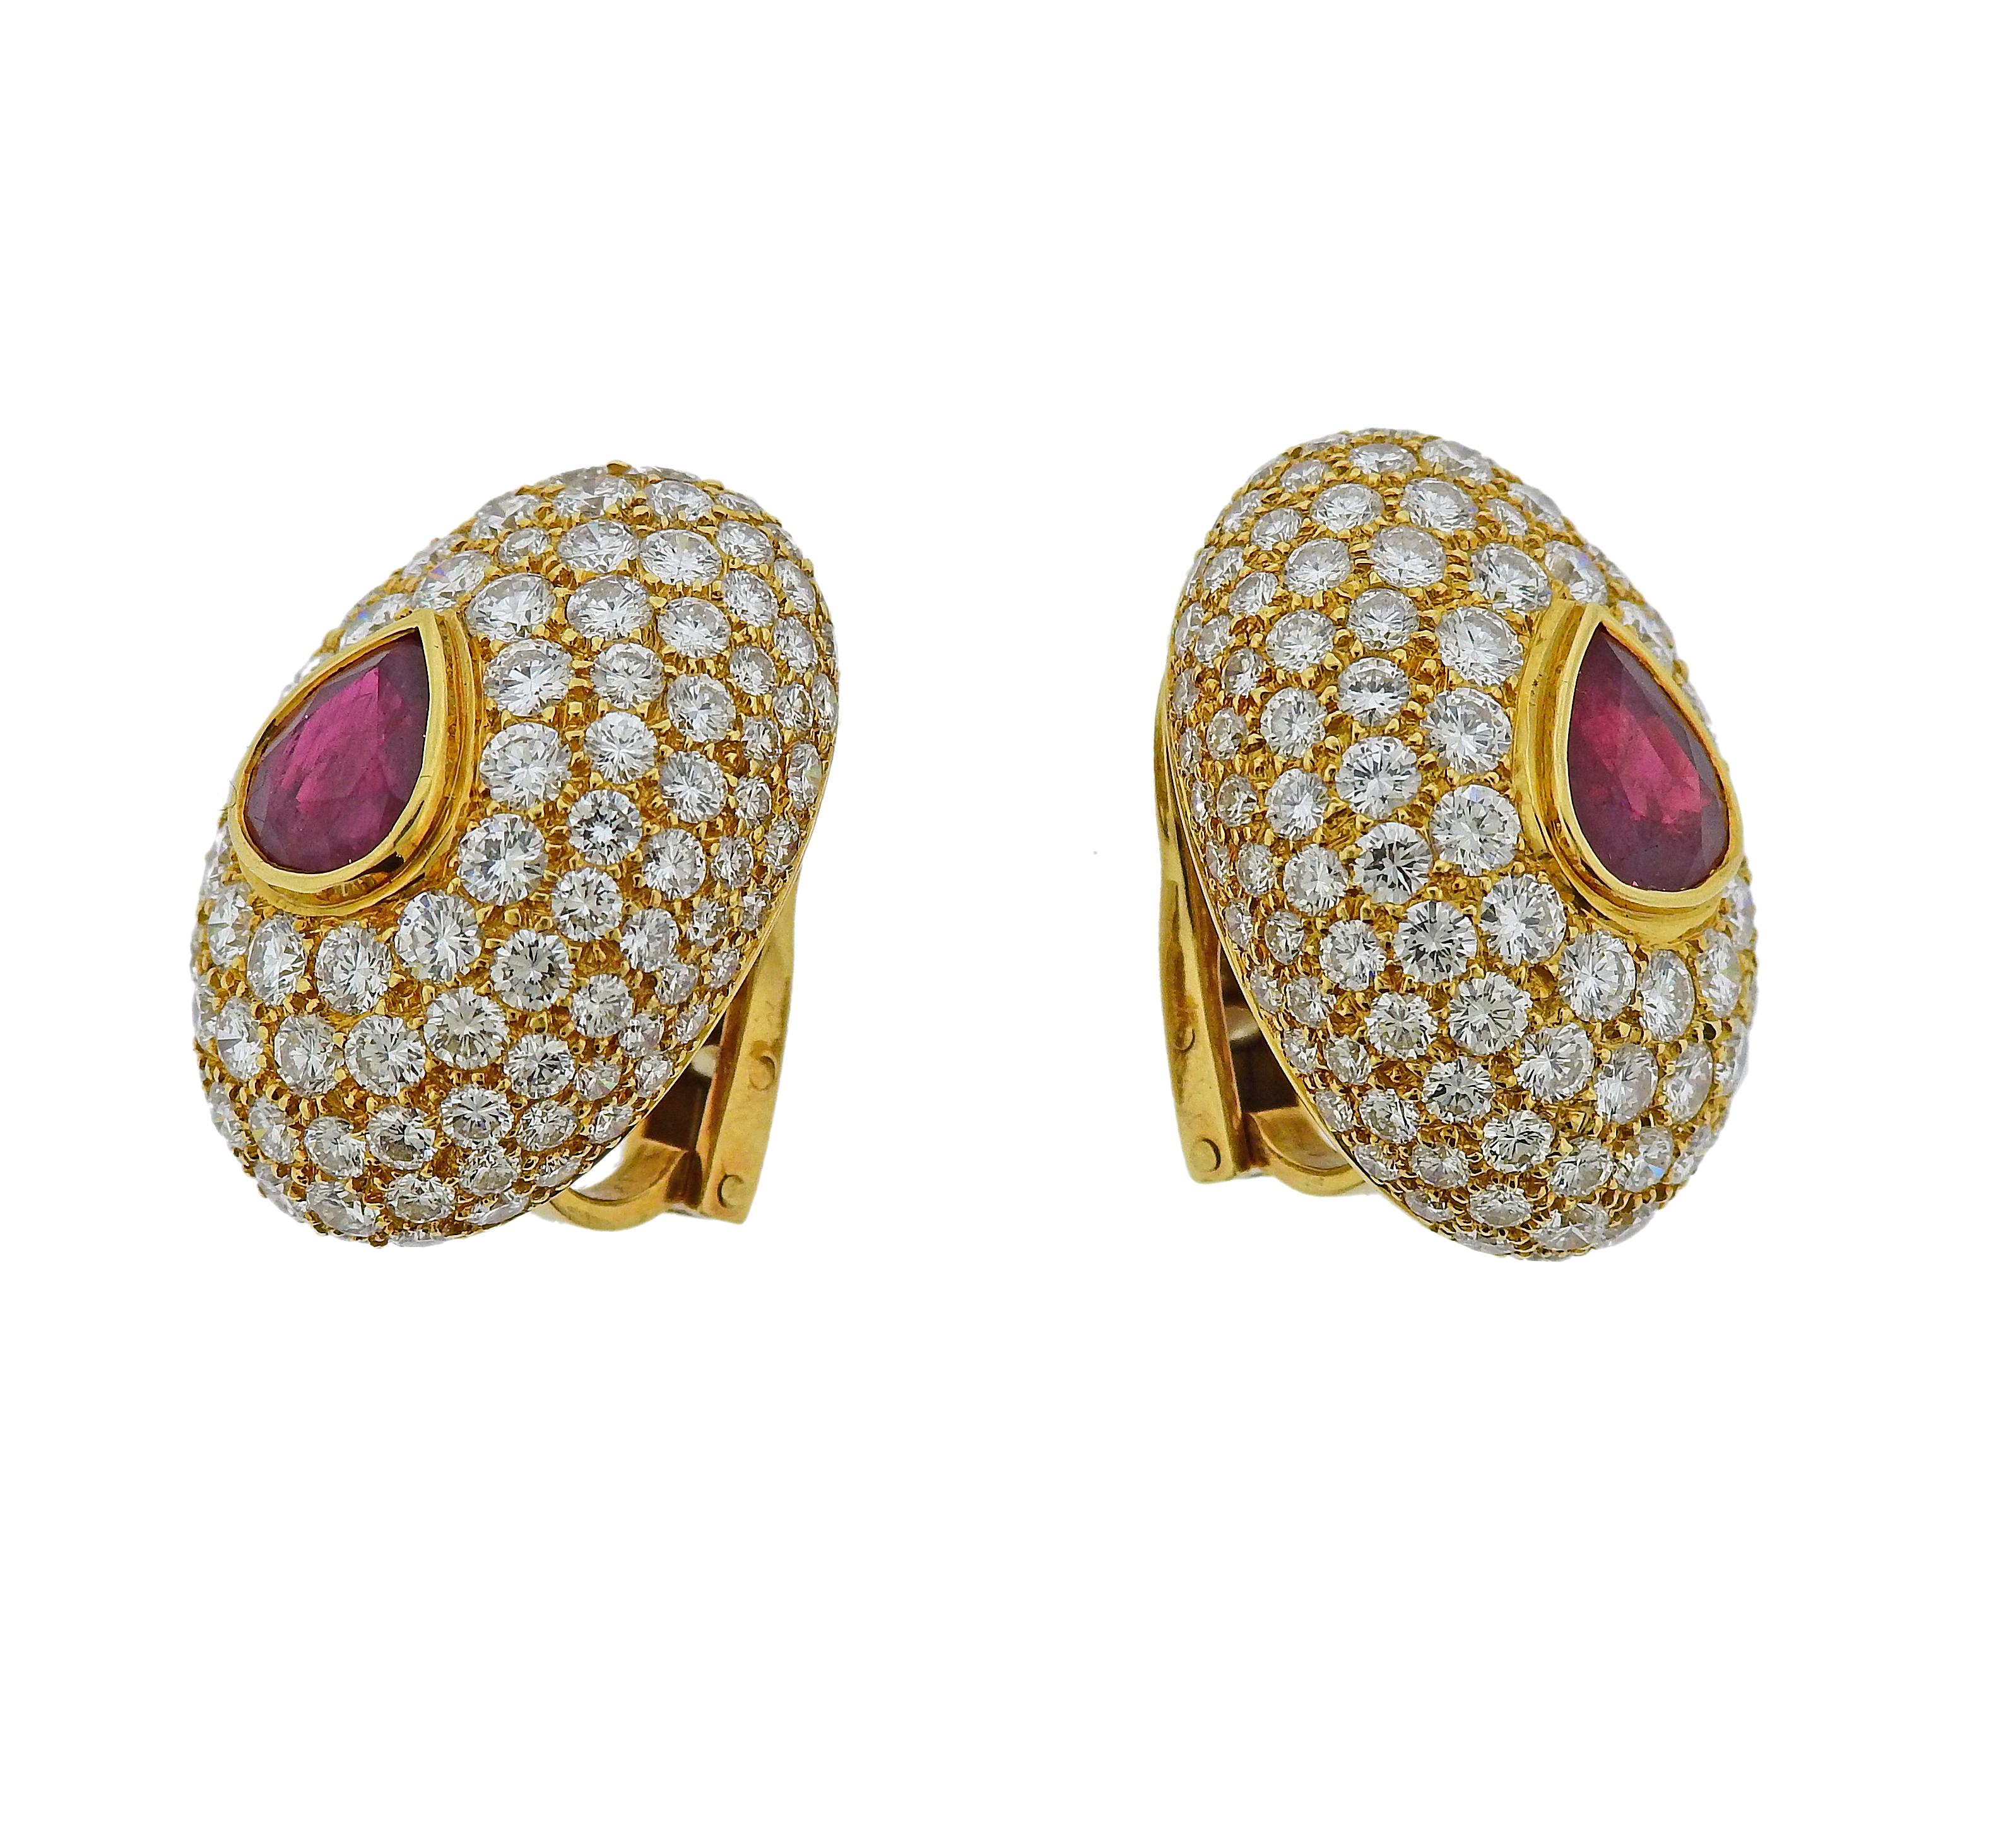 Pair of impressive Hennell 18k god earrings, set with two rubies in the center (approx. 6 carats total) surrounded with a total of approx. 15 carats in G/VS diamonds. Earrings are measured 27mm x 19mm. Weight is 17.5 grams. Marked: Hennell, SGD.